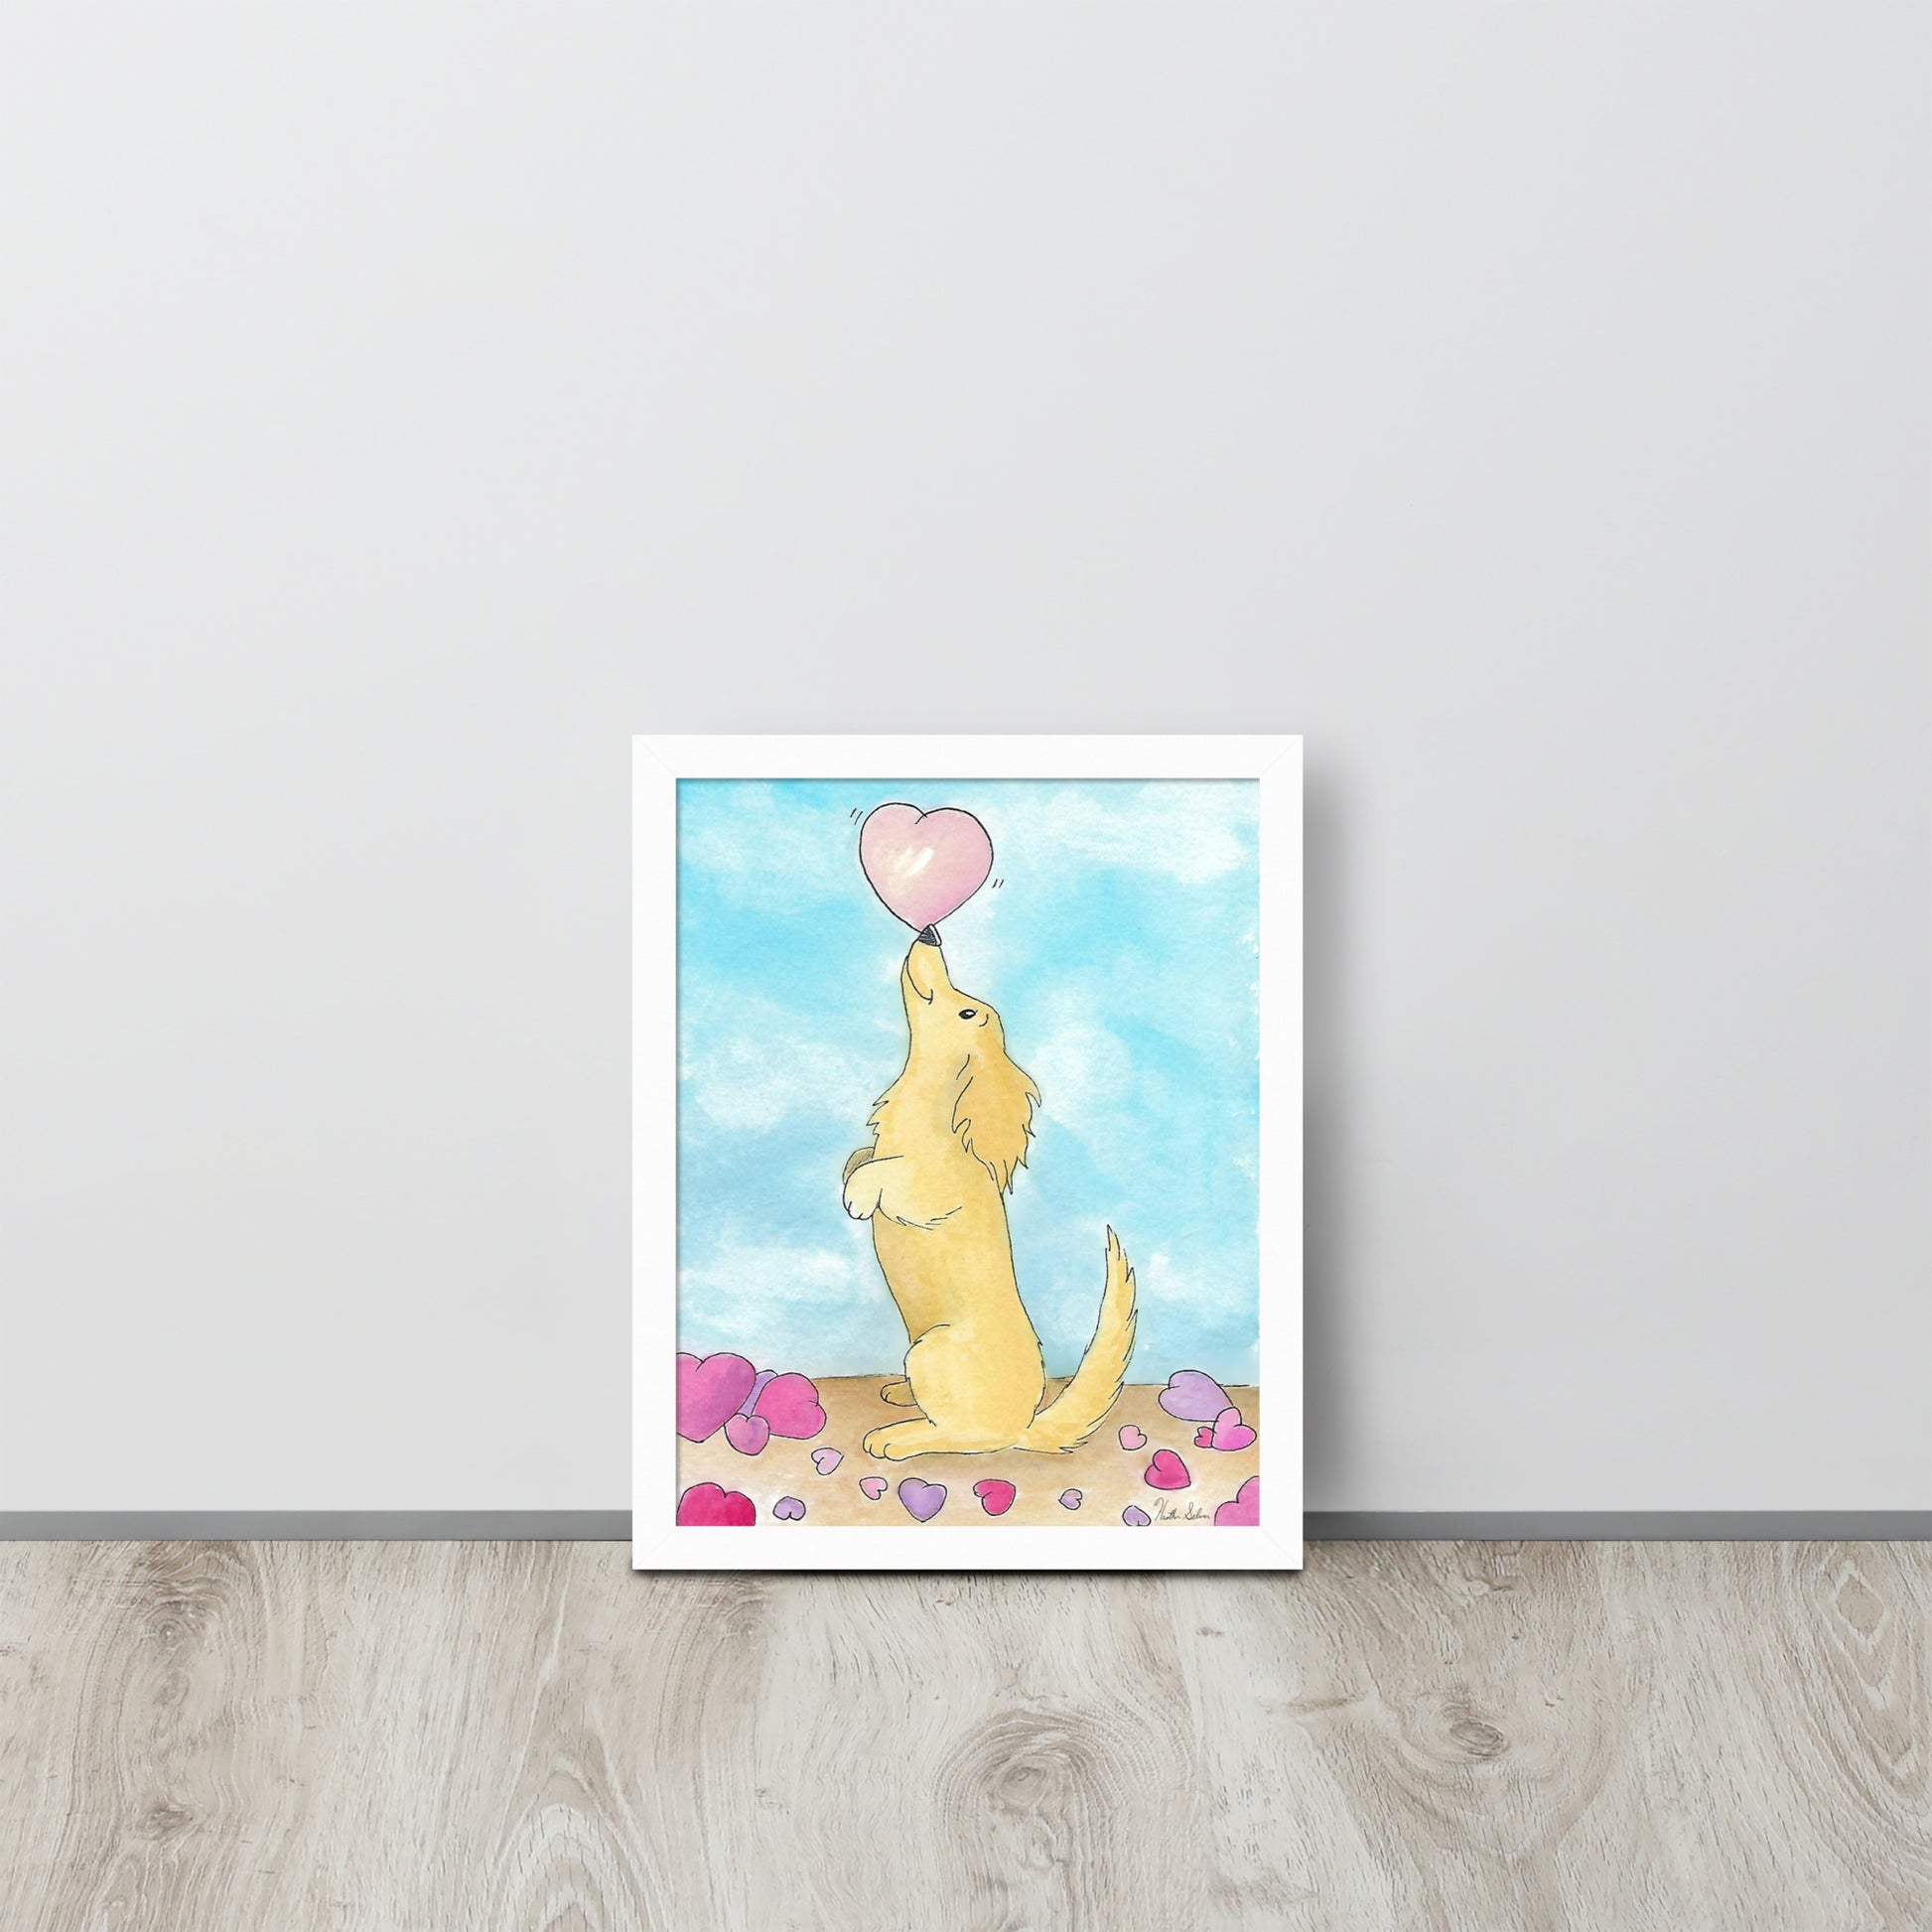 Framed watercolor art print entitled Puppy Love.  11 by 14 inch print in white ayous wood frame. Has acrylite cover to protect the art print. Hanging hardware included. Shown leaning against beige wall.